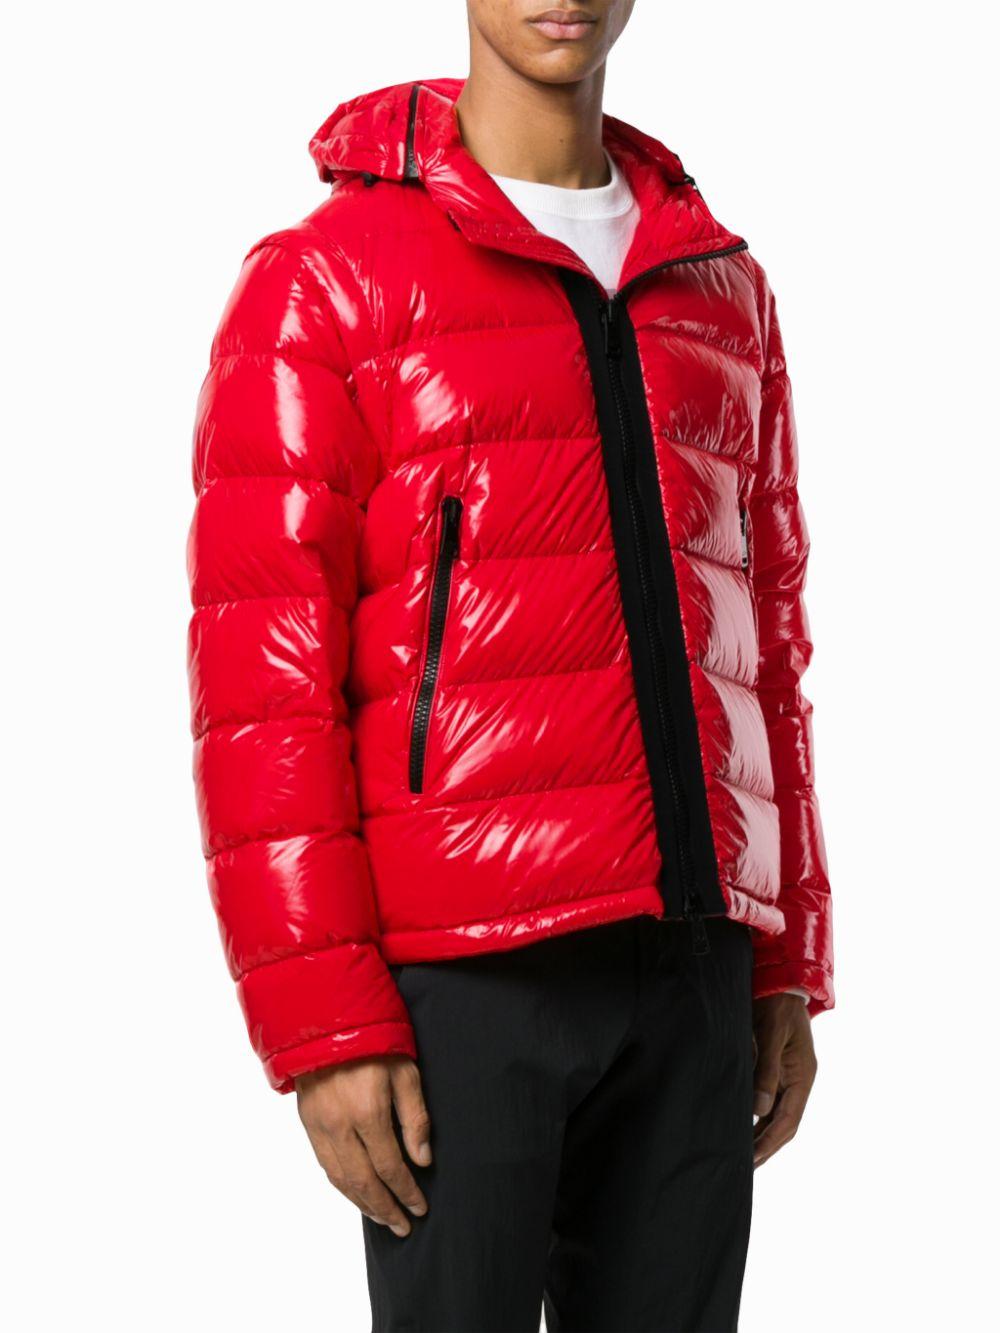 Paul & Shark Glossy Shell Puffer Jacket in Red for Men - Lyst